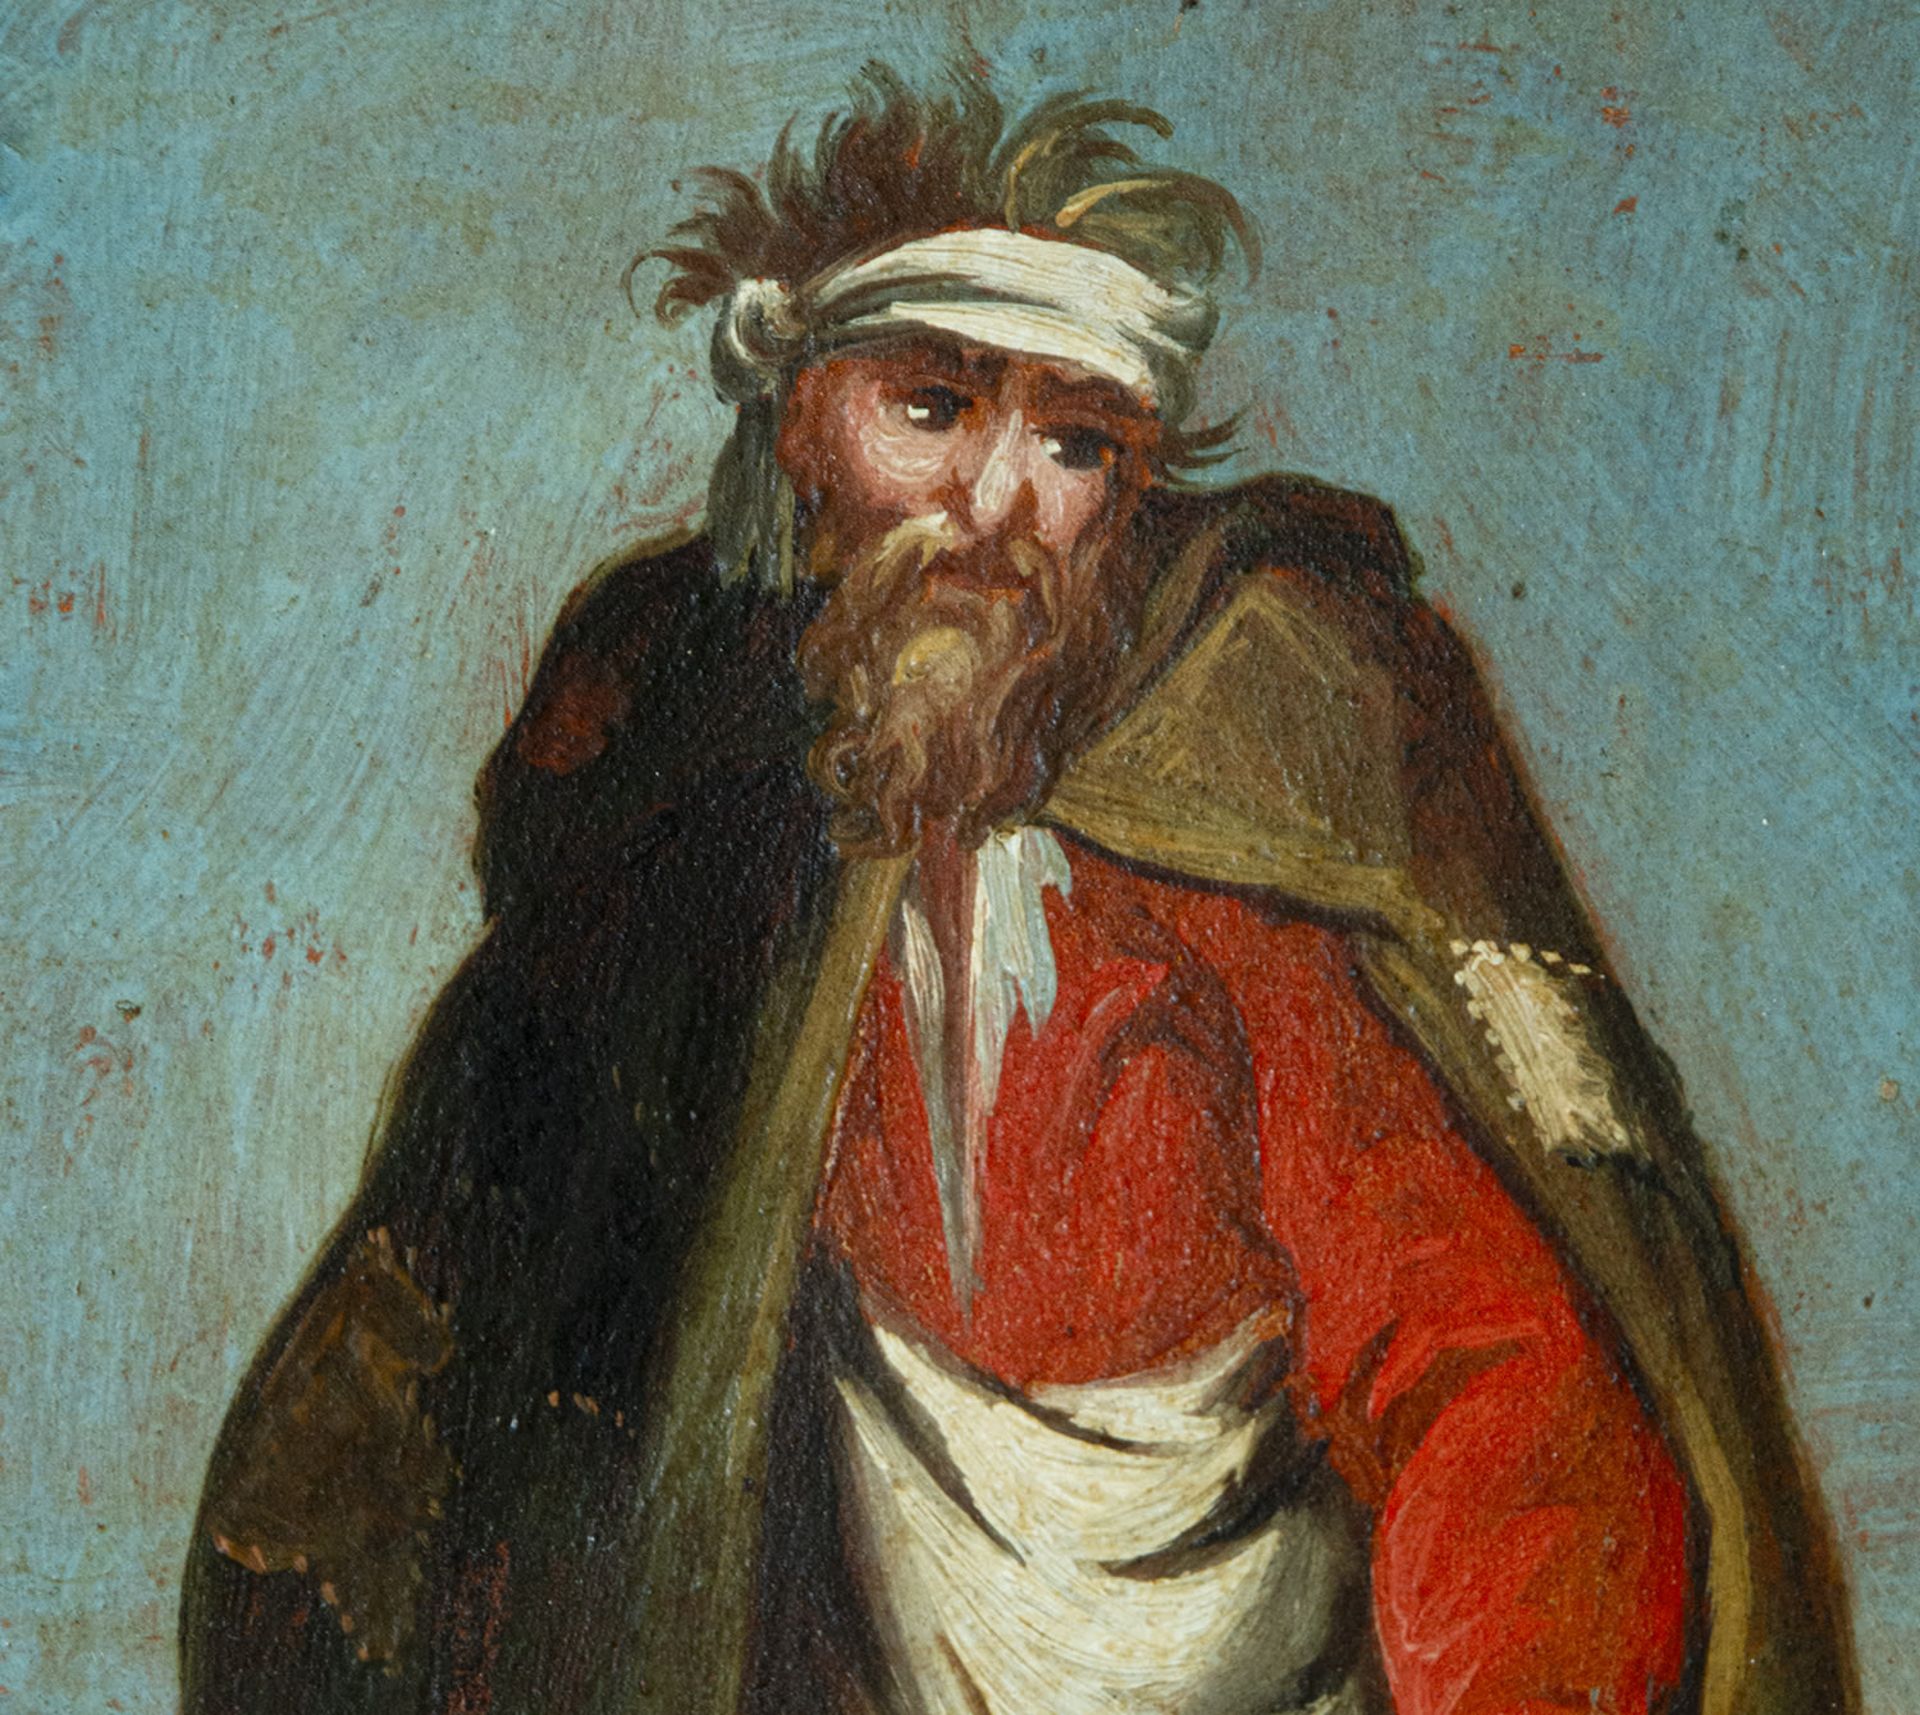 Capitano de Baroni in oil on copper with antique Italian marbled frame from the 18th century - Image 3 of 5